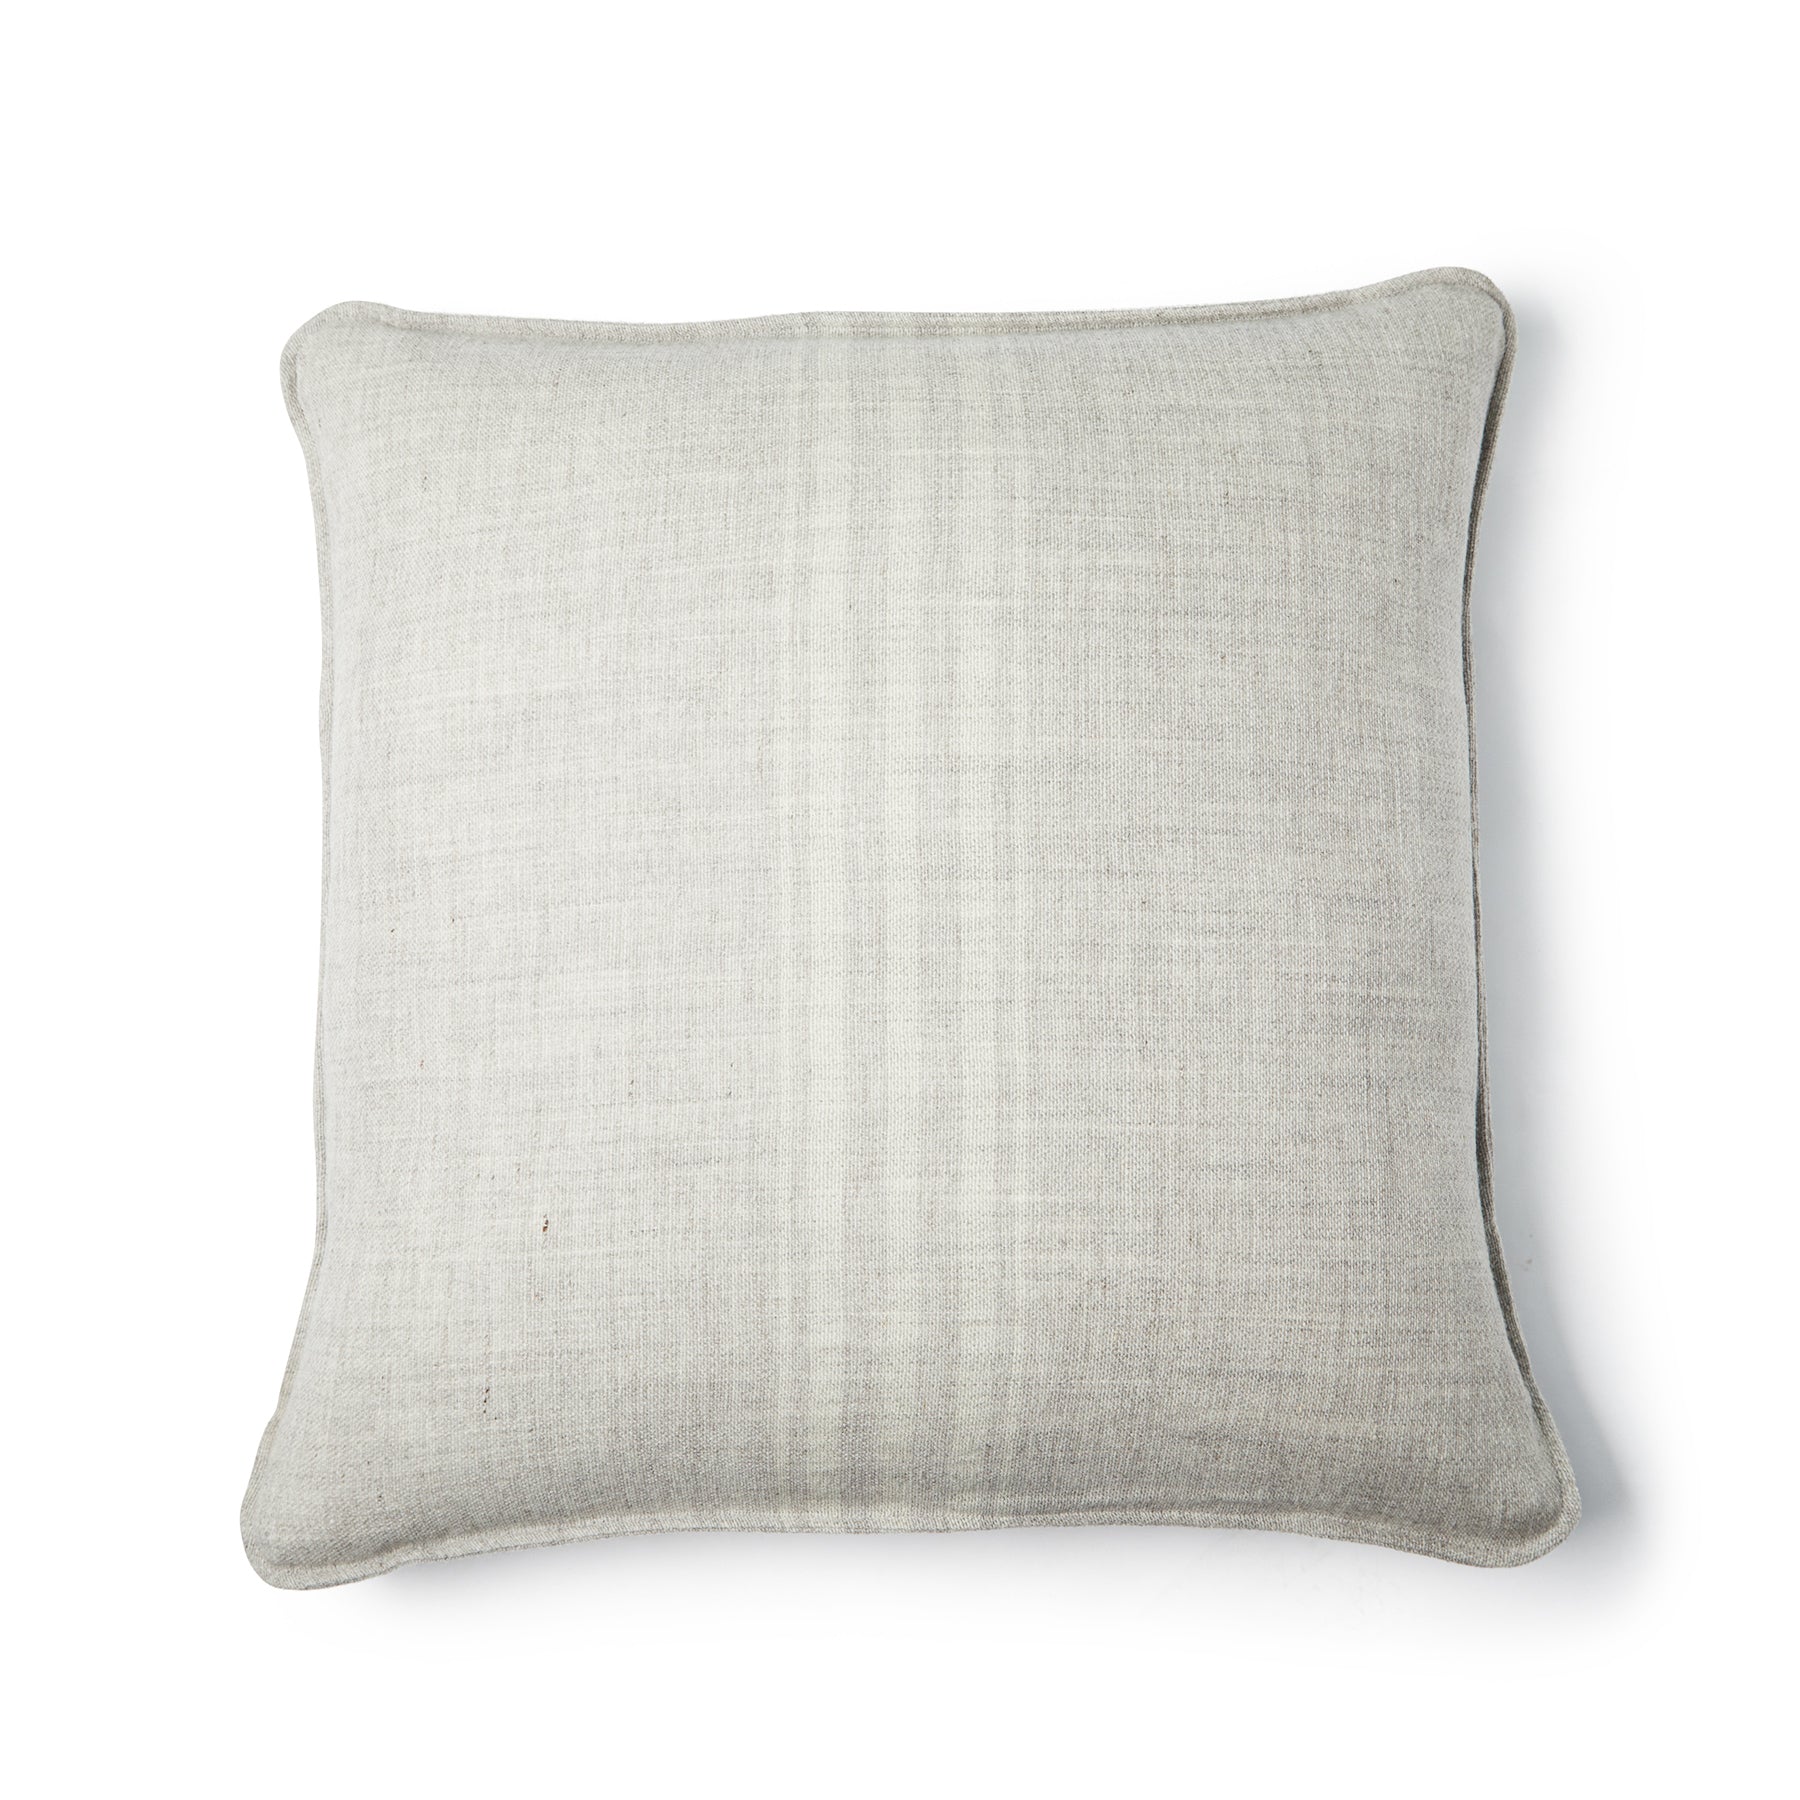 Heritage Pillow in Natural White Zoom Image 1